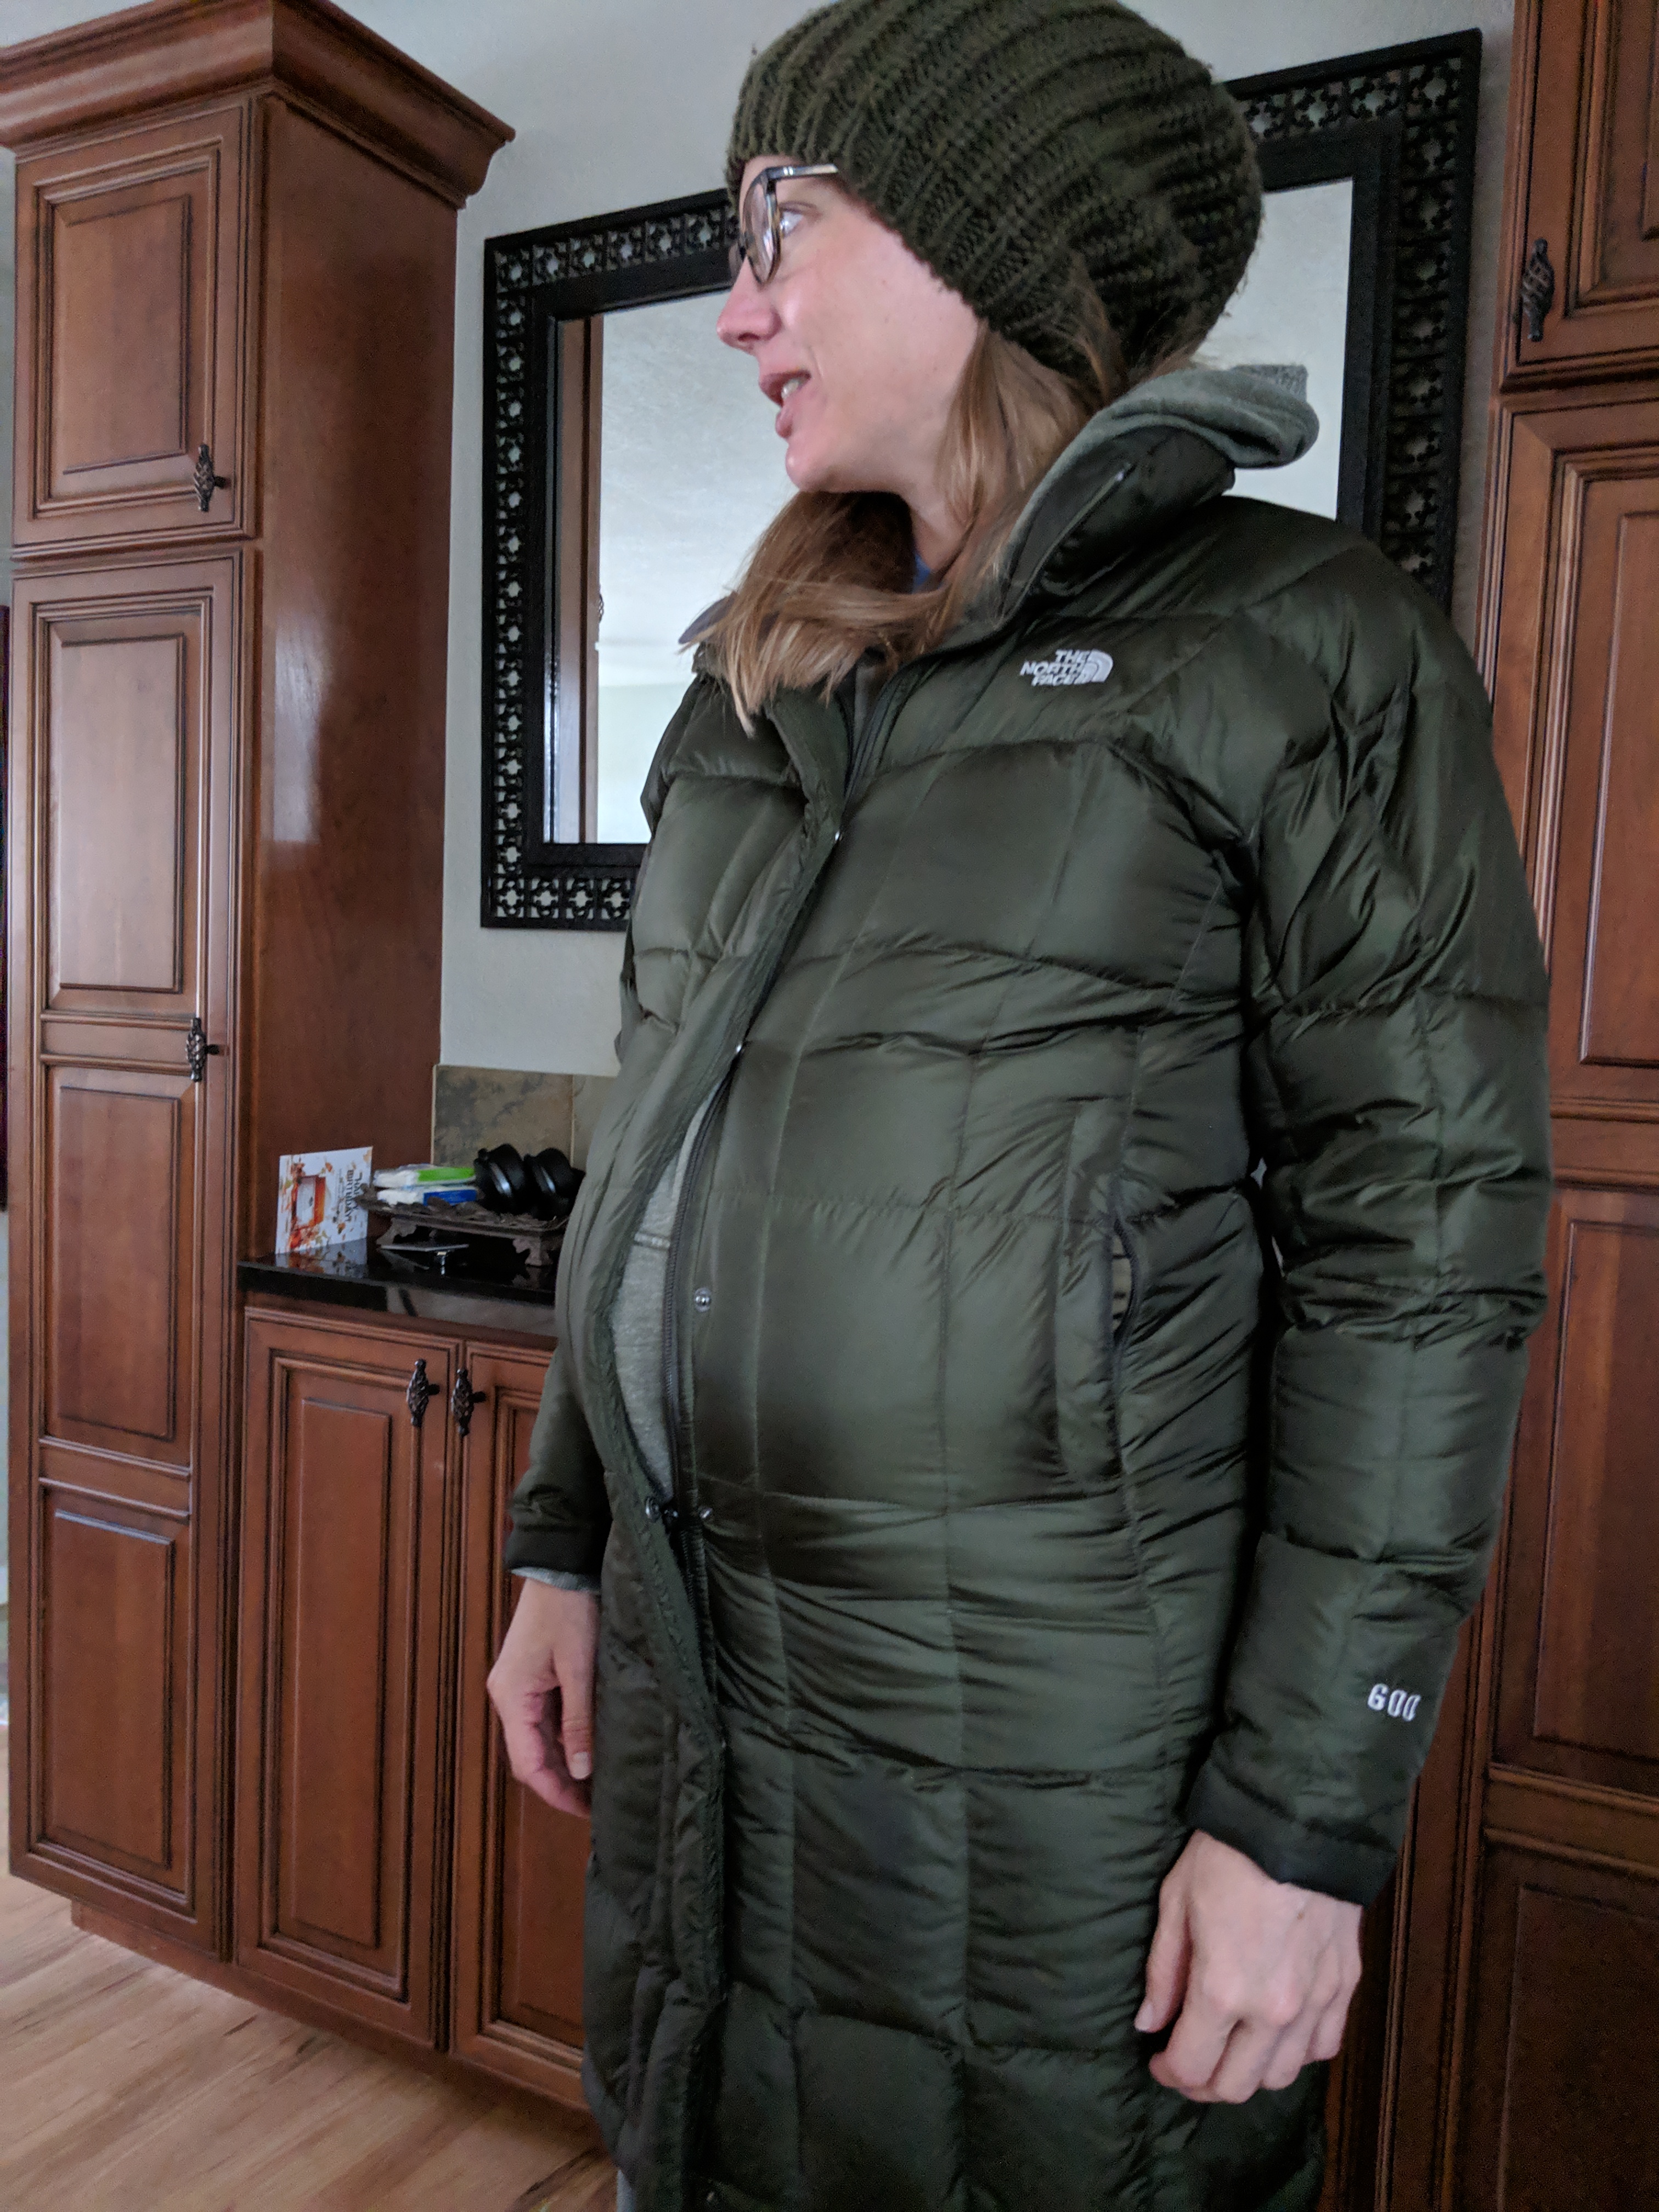 Katie bursting out of her coat before giving birth.